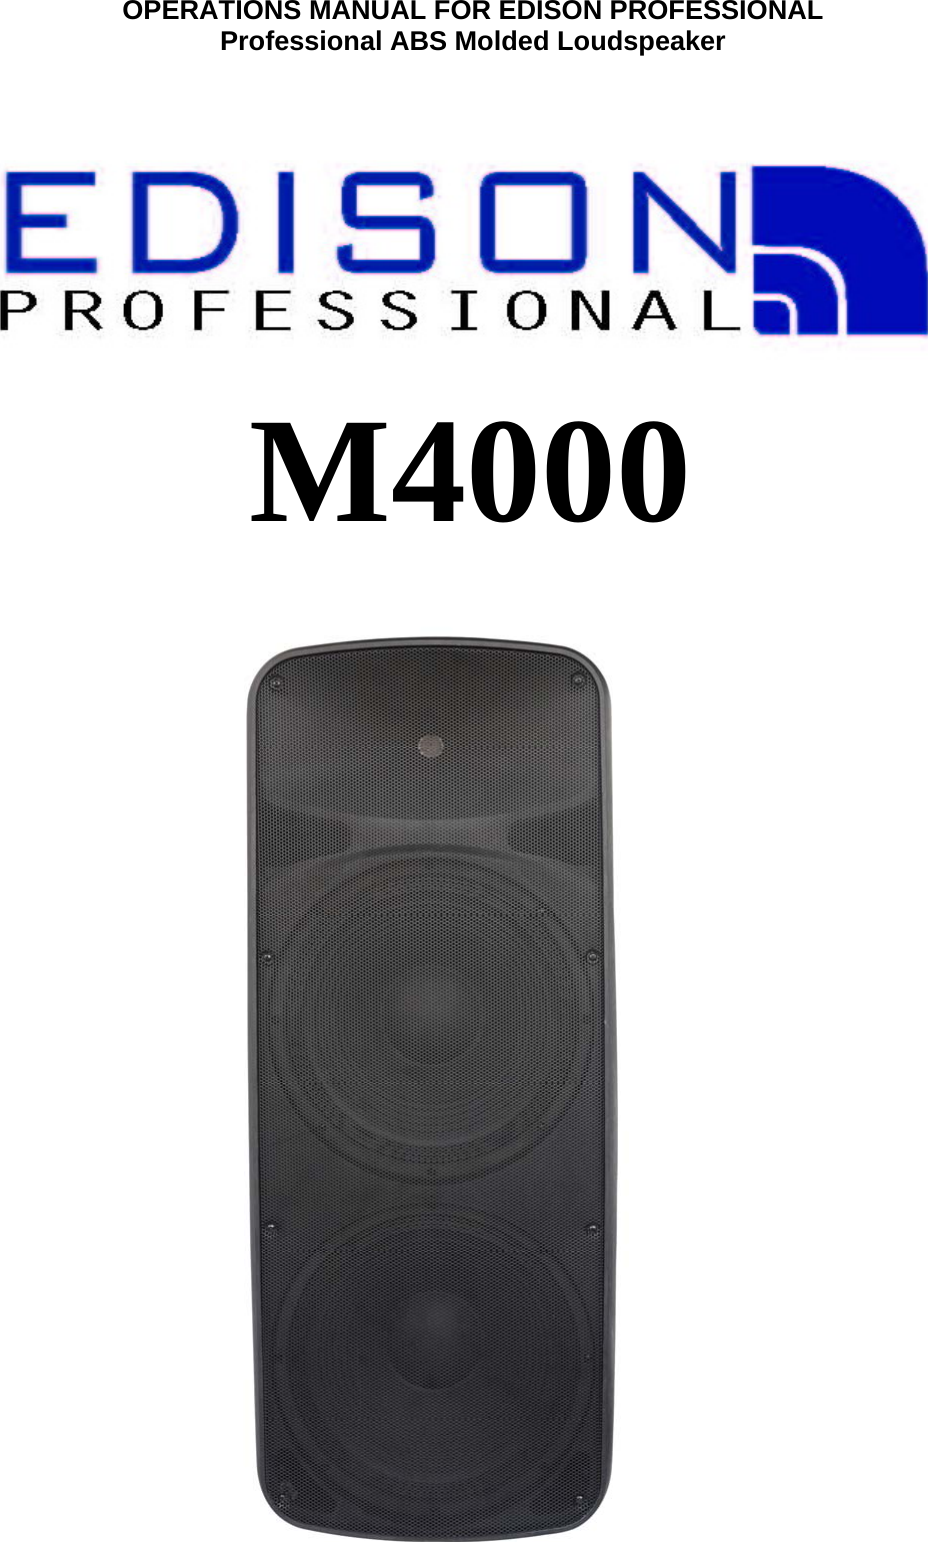 OPERATIONS MANUAL FOR EDISON PROFESSIONAL Professional ABS Molded Loudspeaker             M4000               